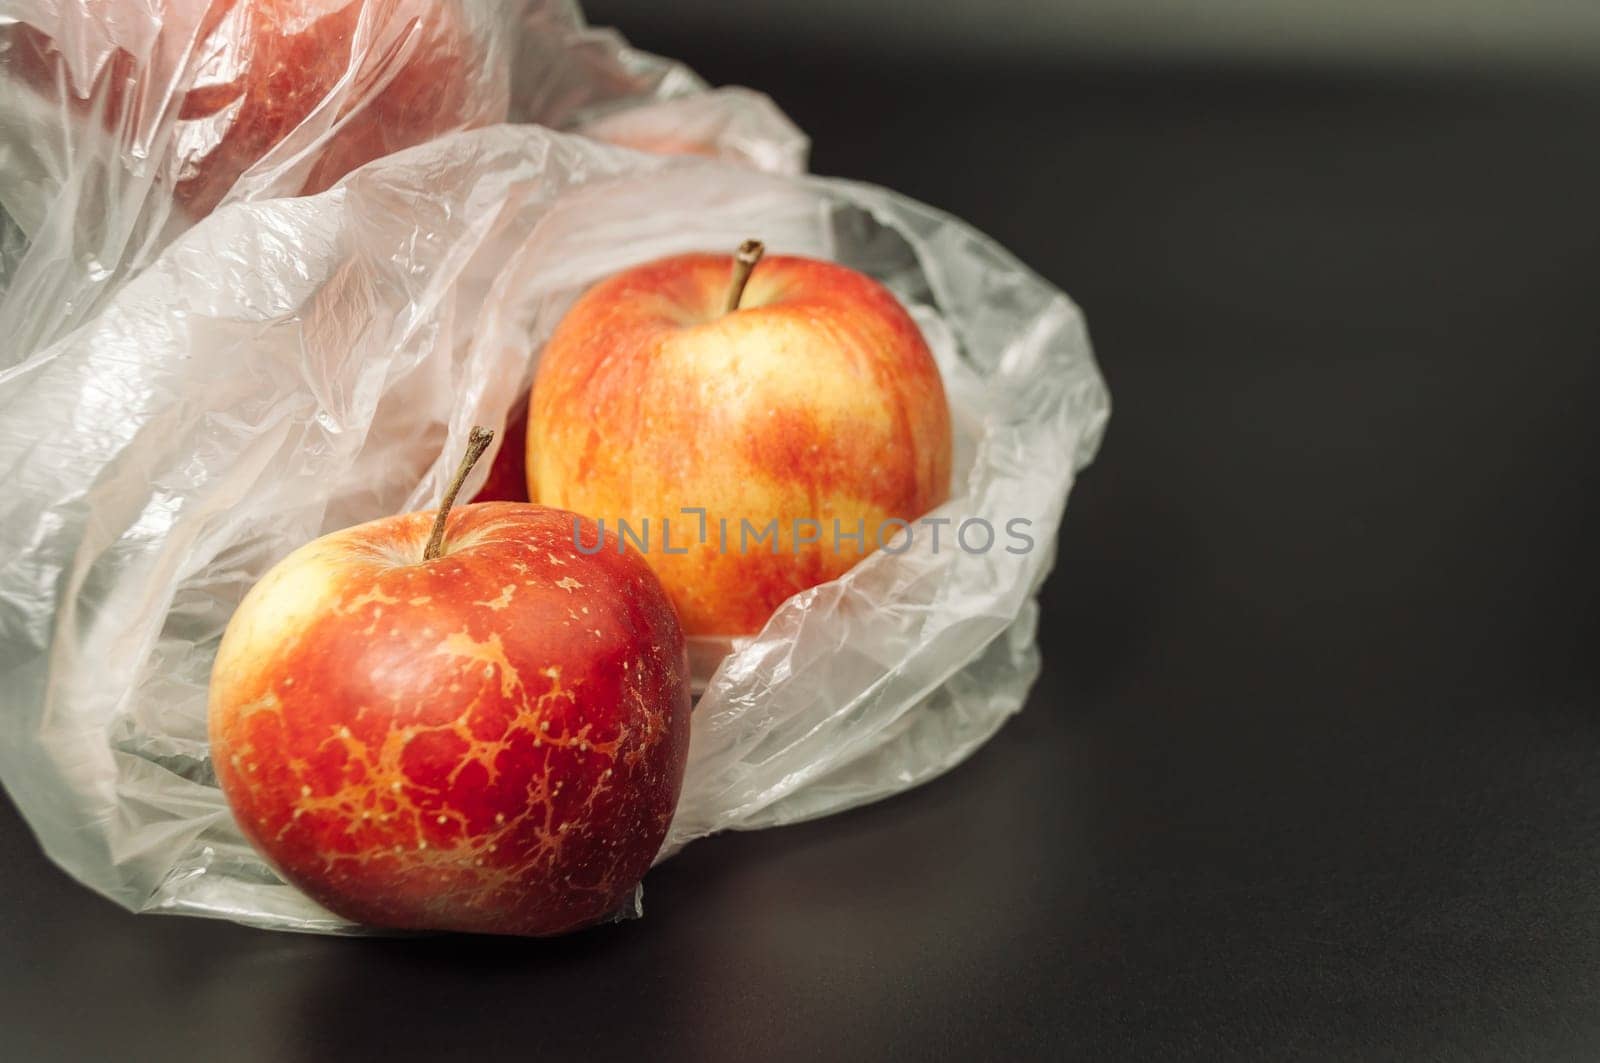 Two apples are in a plastic bag on a black background. The apples are red and shiny